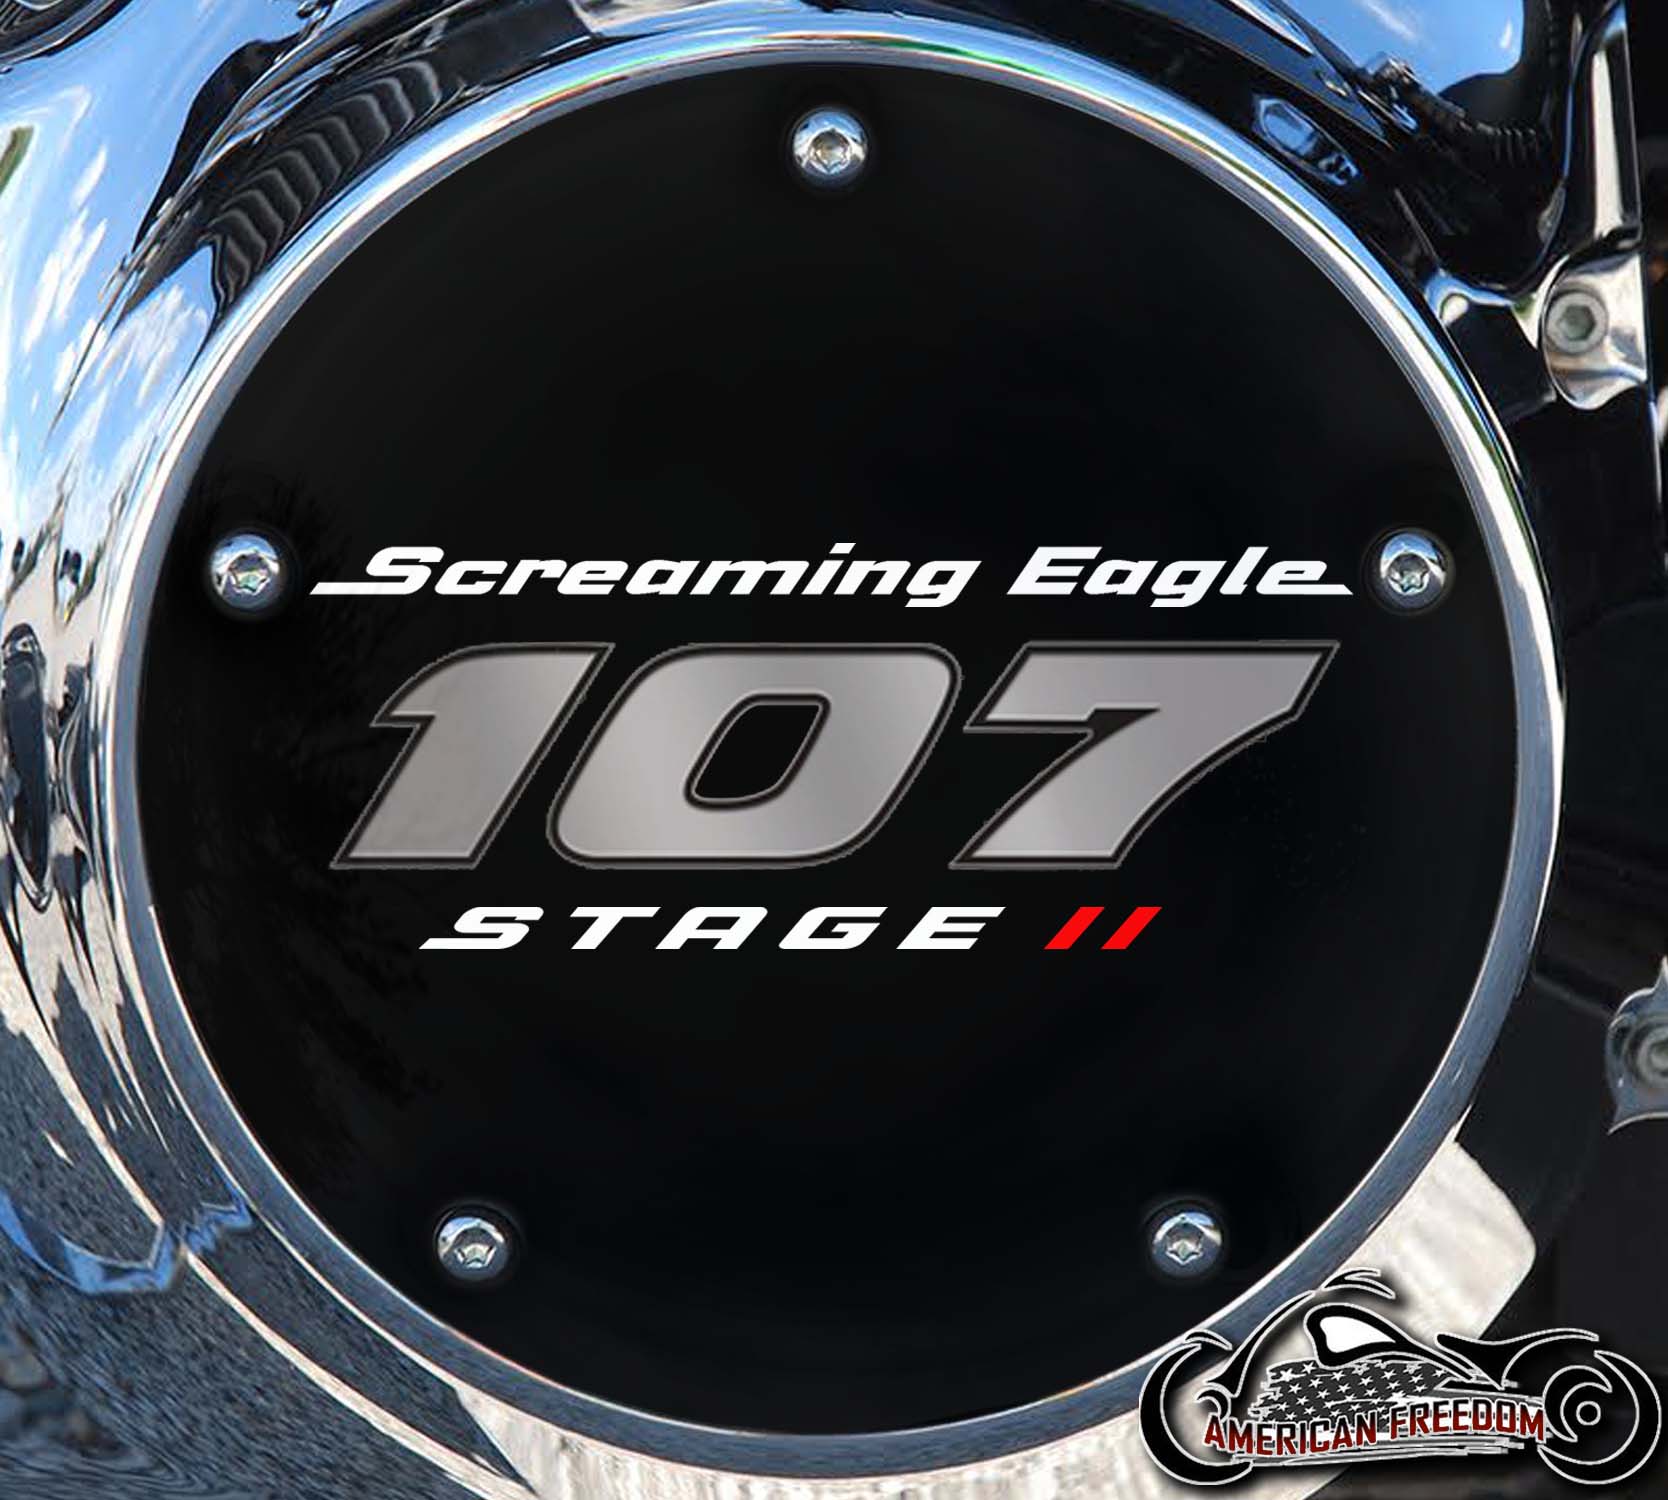 Screaming Eagle Stage II 107 Derby cover